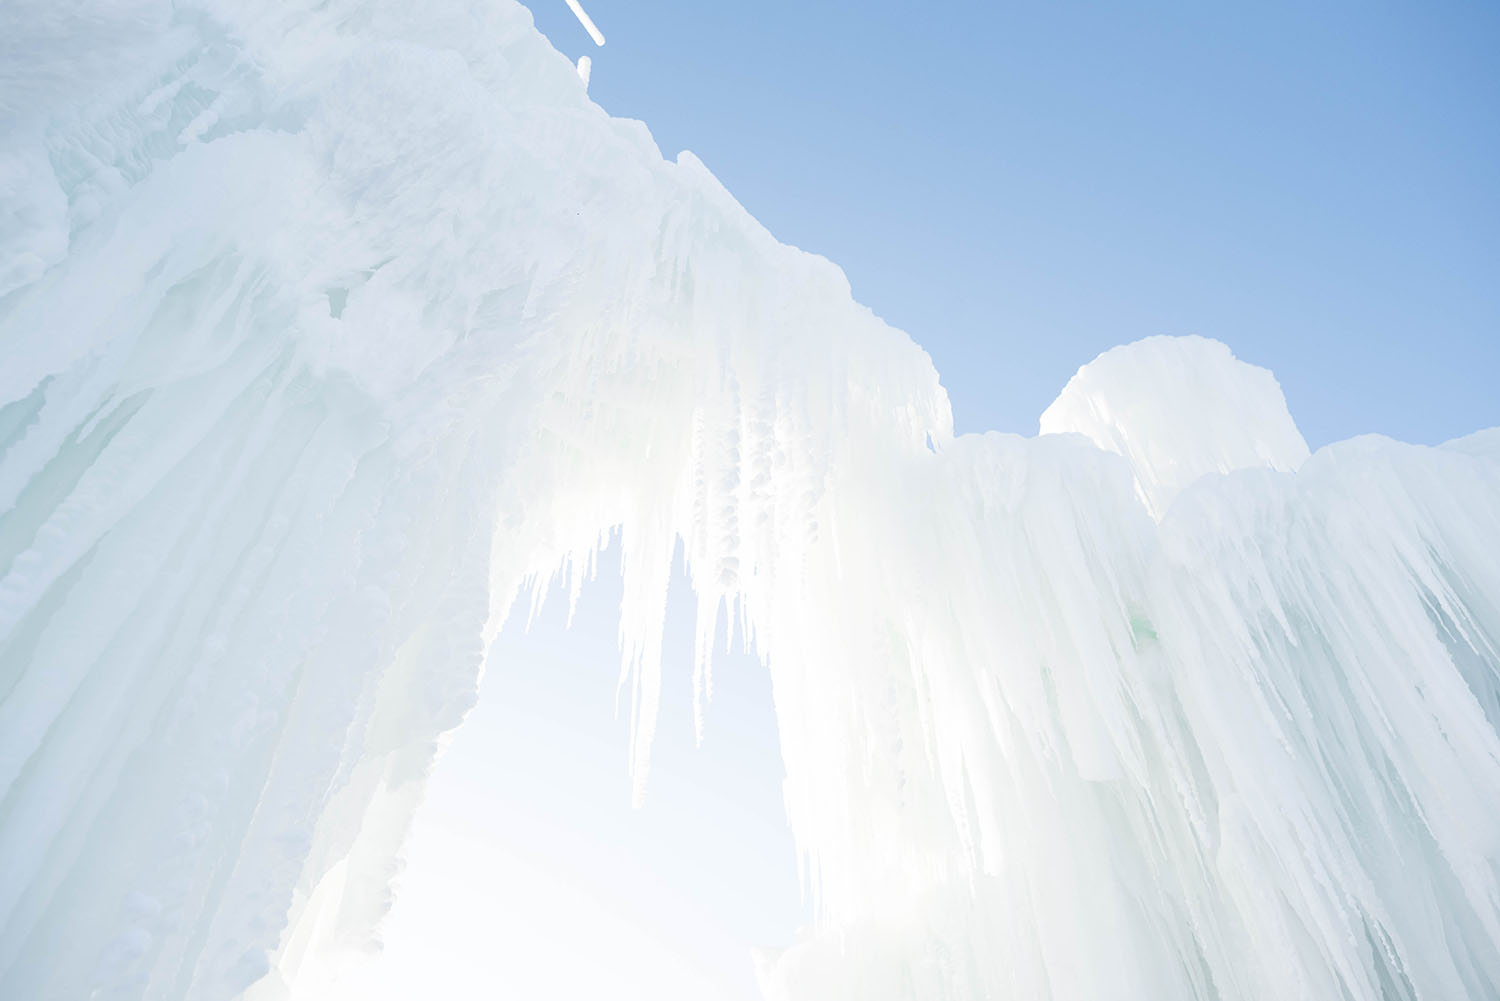 Ice formations under blue skies at Ice Castles in Winnipeg, Manitoba, as captured by travel blogger Cee Fardoe of Coco & Vera